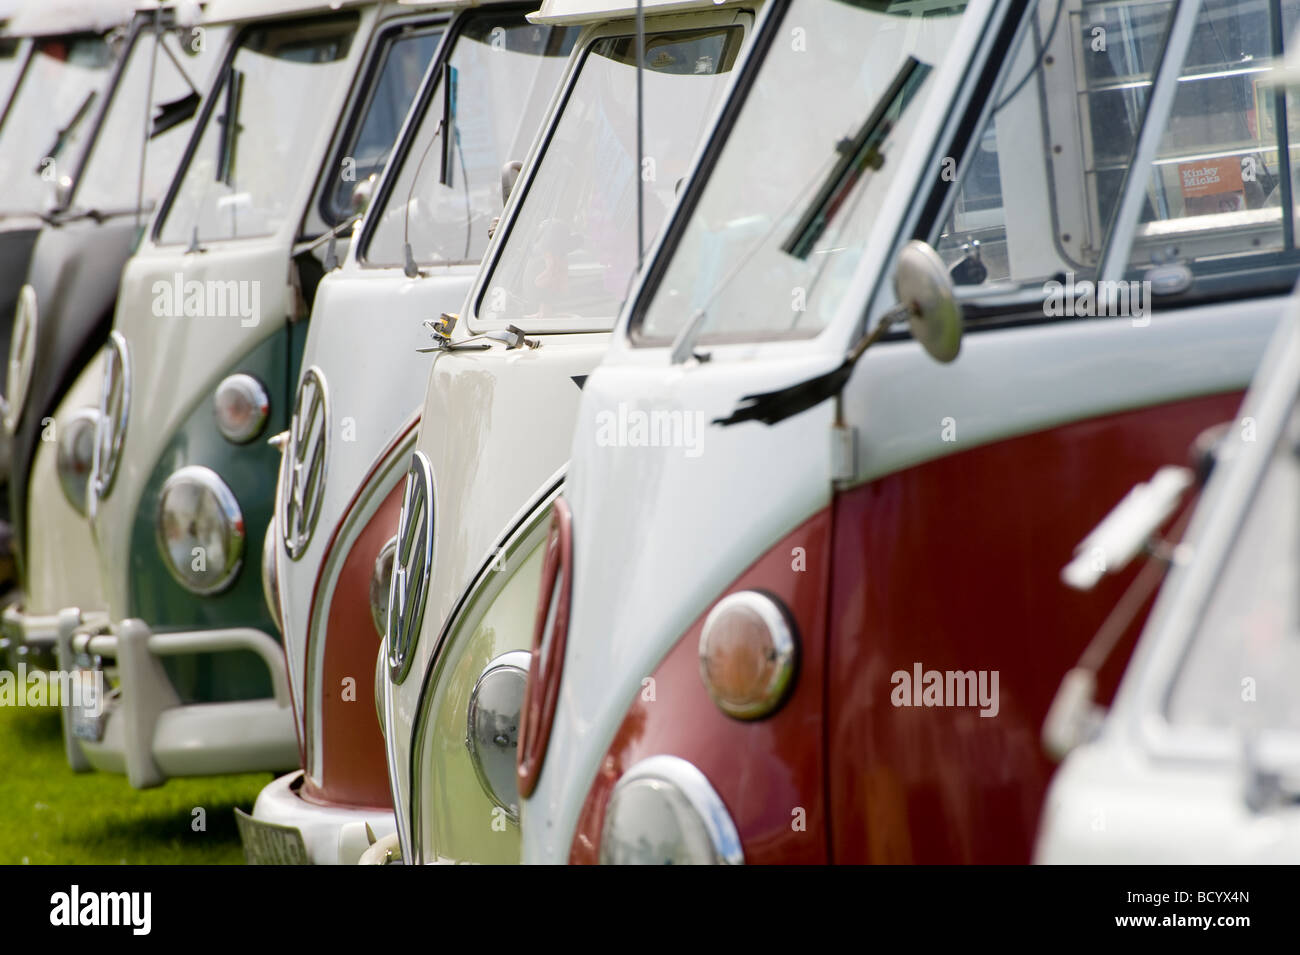 Row of colourful split screen volkswagen camper vans at an enthusiasts rally Stock Photo